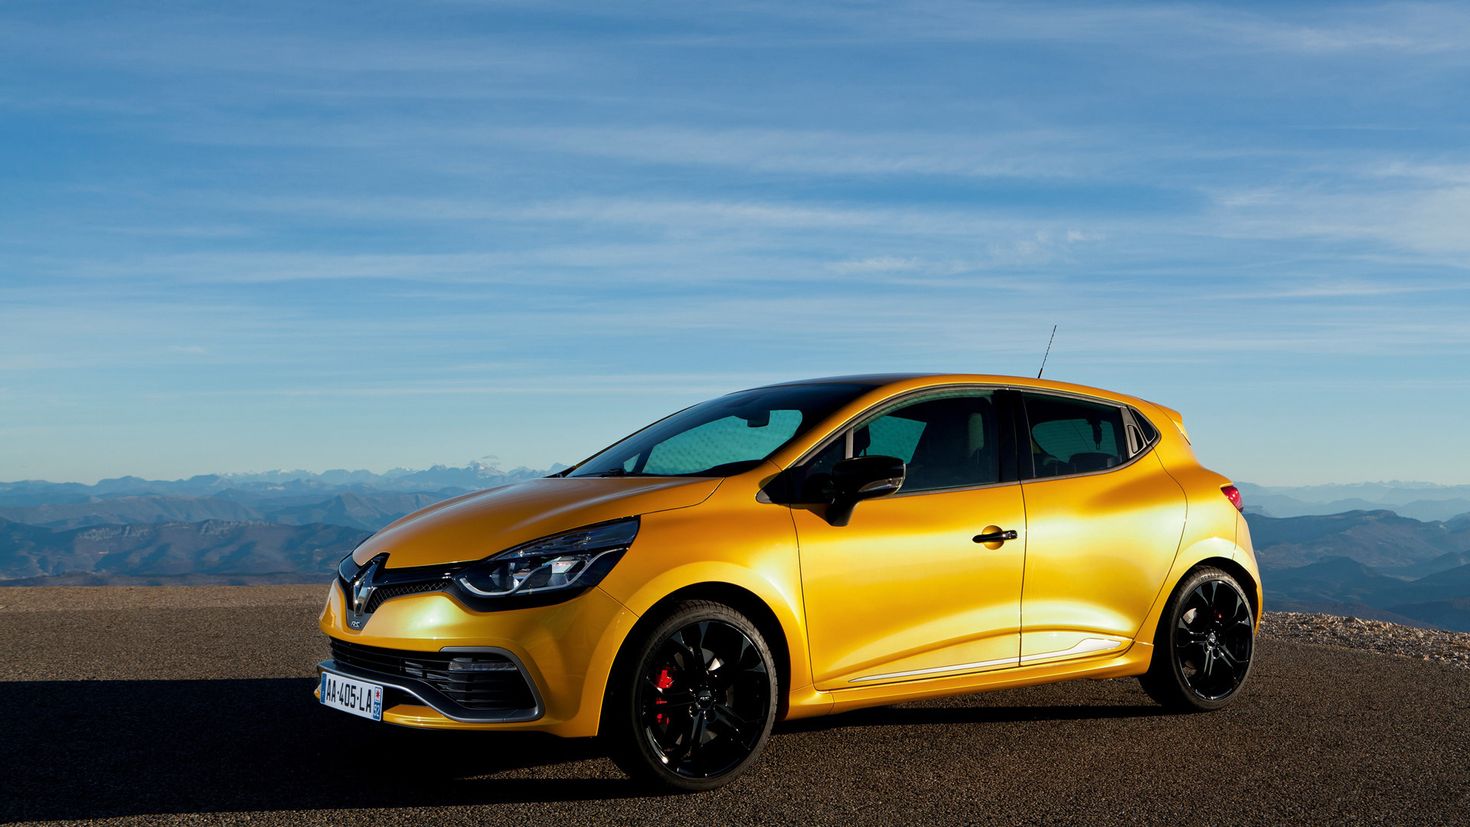 Opel renault. Renault Clio RS 2012. Рено Клио РС 2013. Renault Clio RS 1. Рено Клио РС 2022.